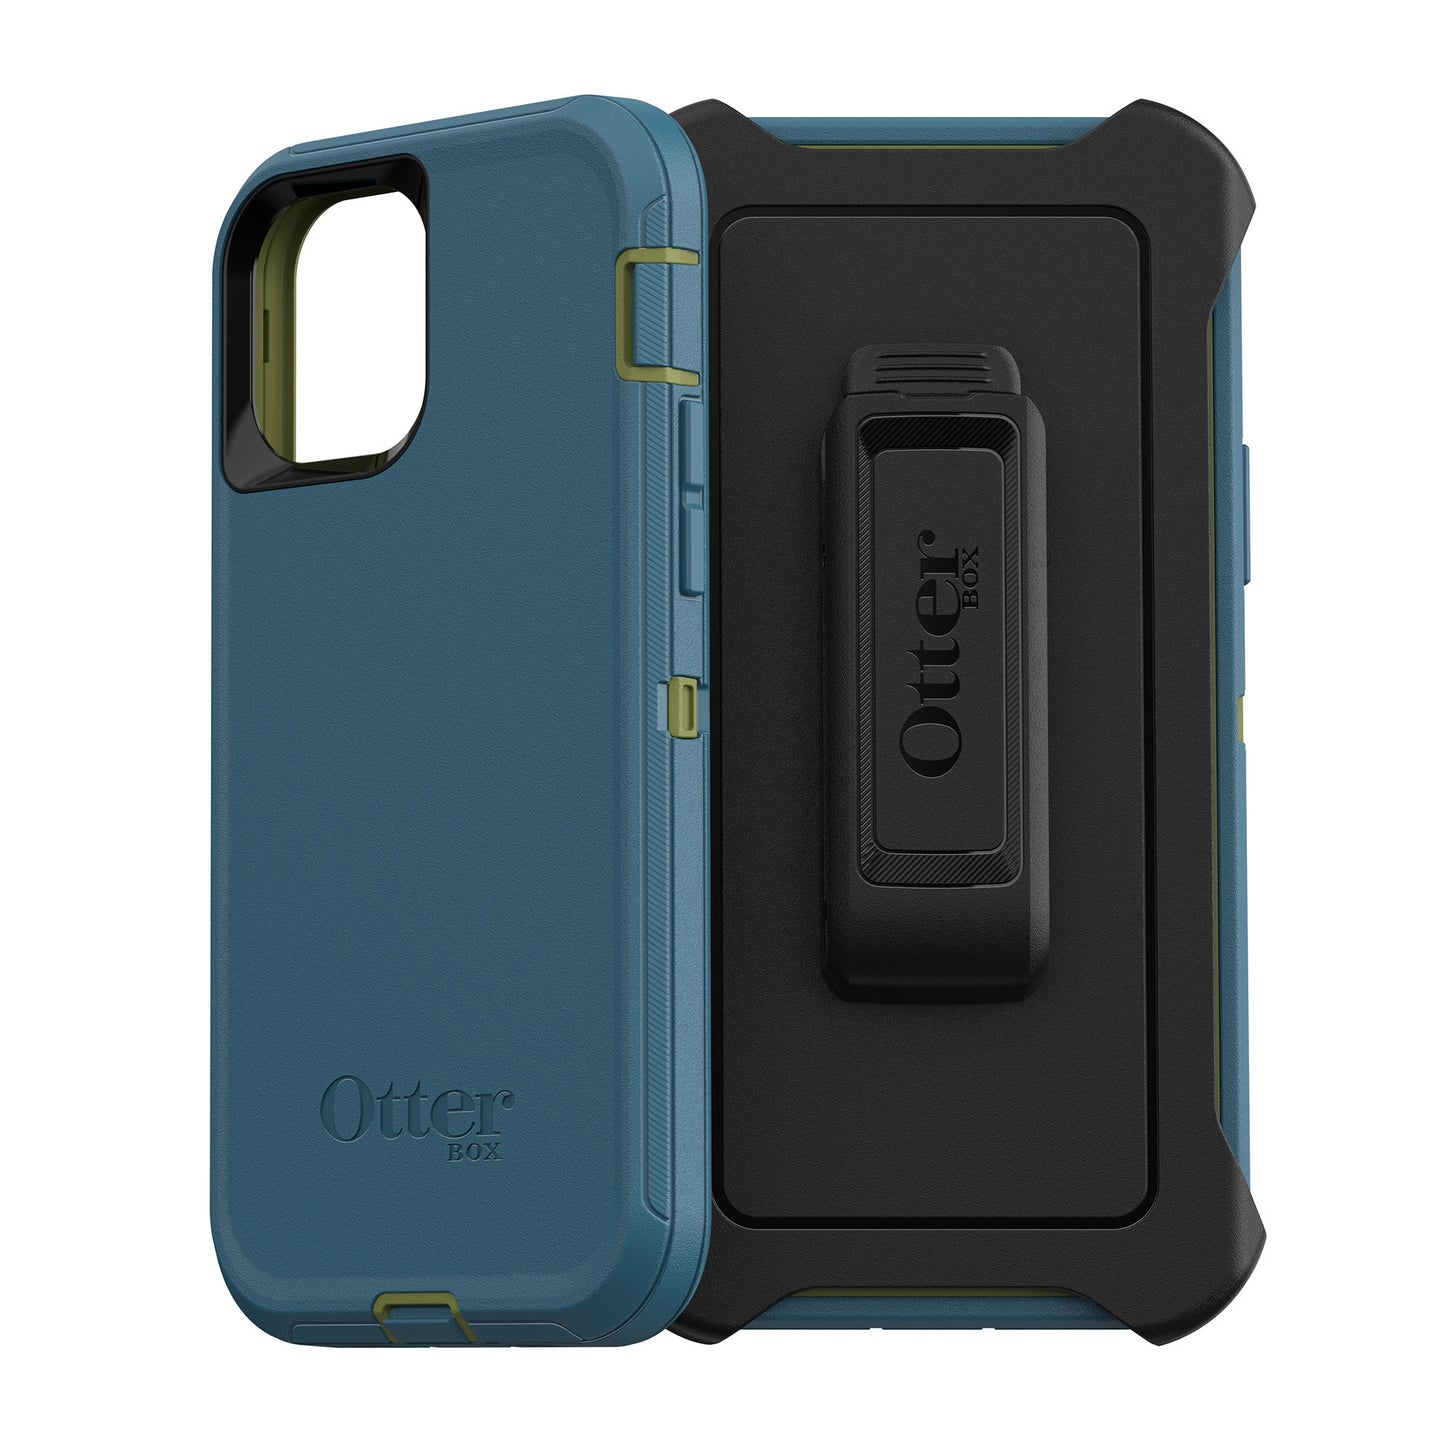 iPhone 12/12 Pro Otterbox Blue/Green (Teal me About It) Defender Series Case - 15-07810